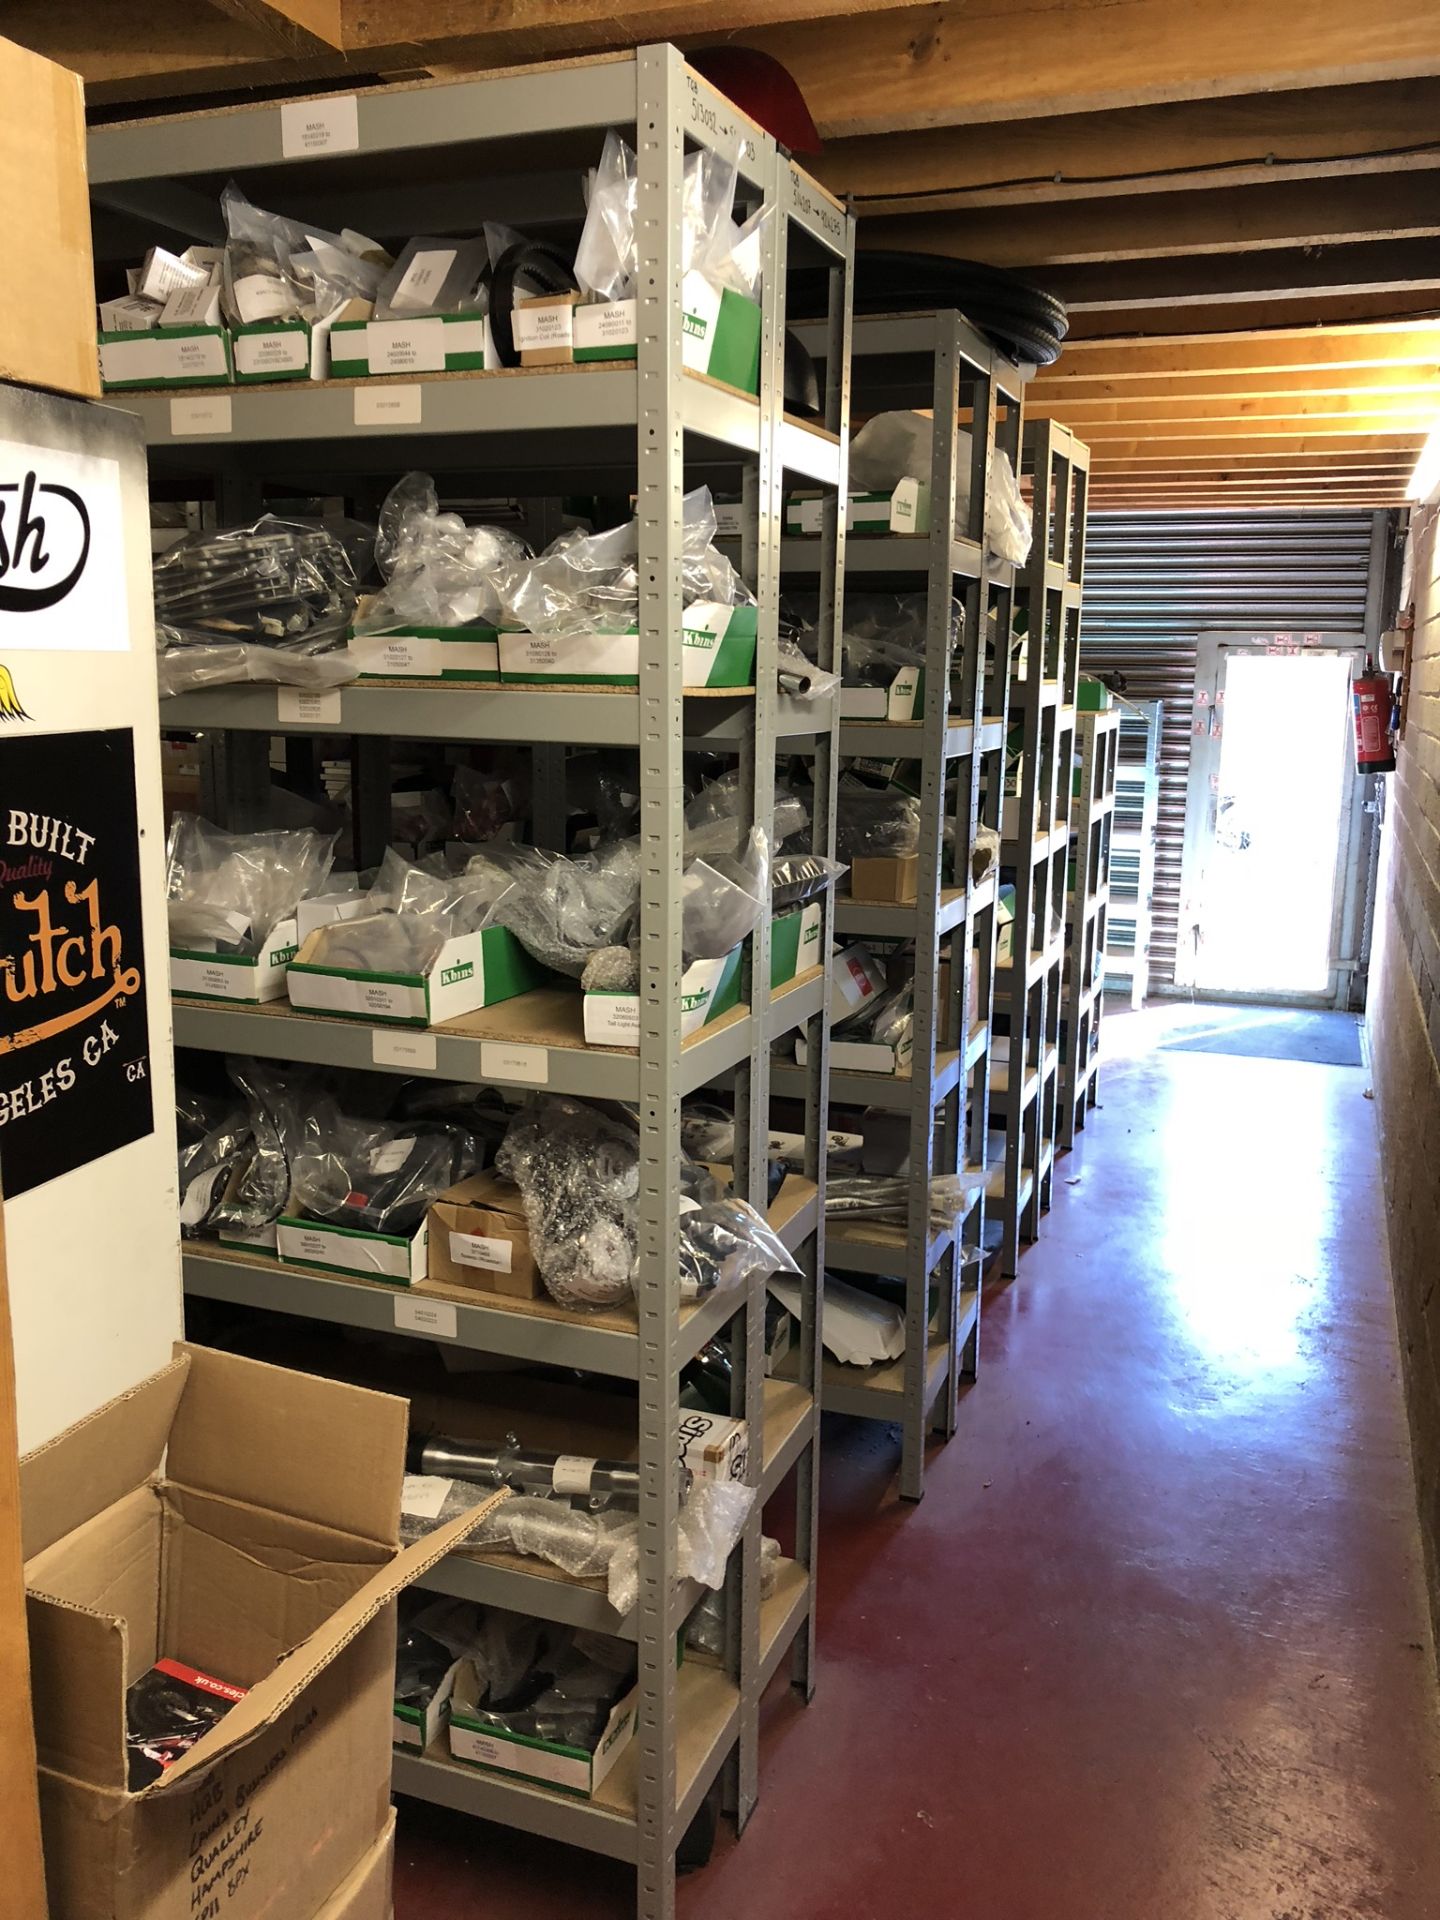 Package of Mash Motorcycle Spares - Circa £30,000 Retail Value- Over 450 Lines